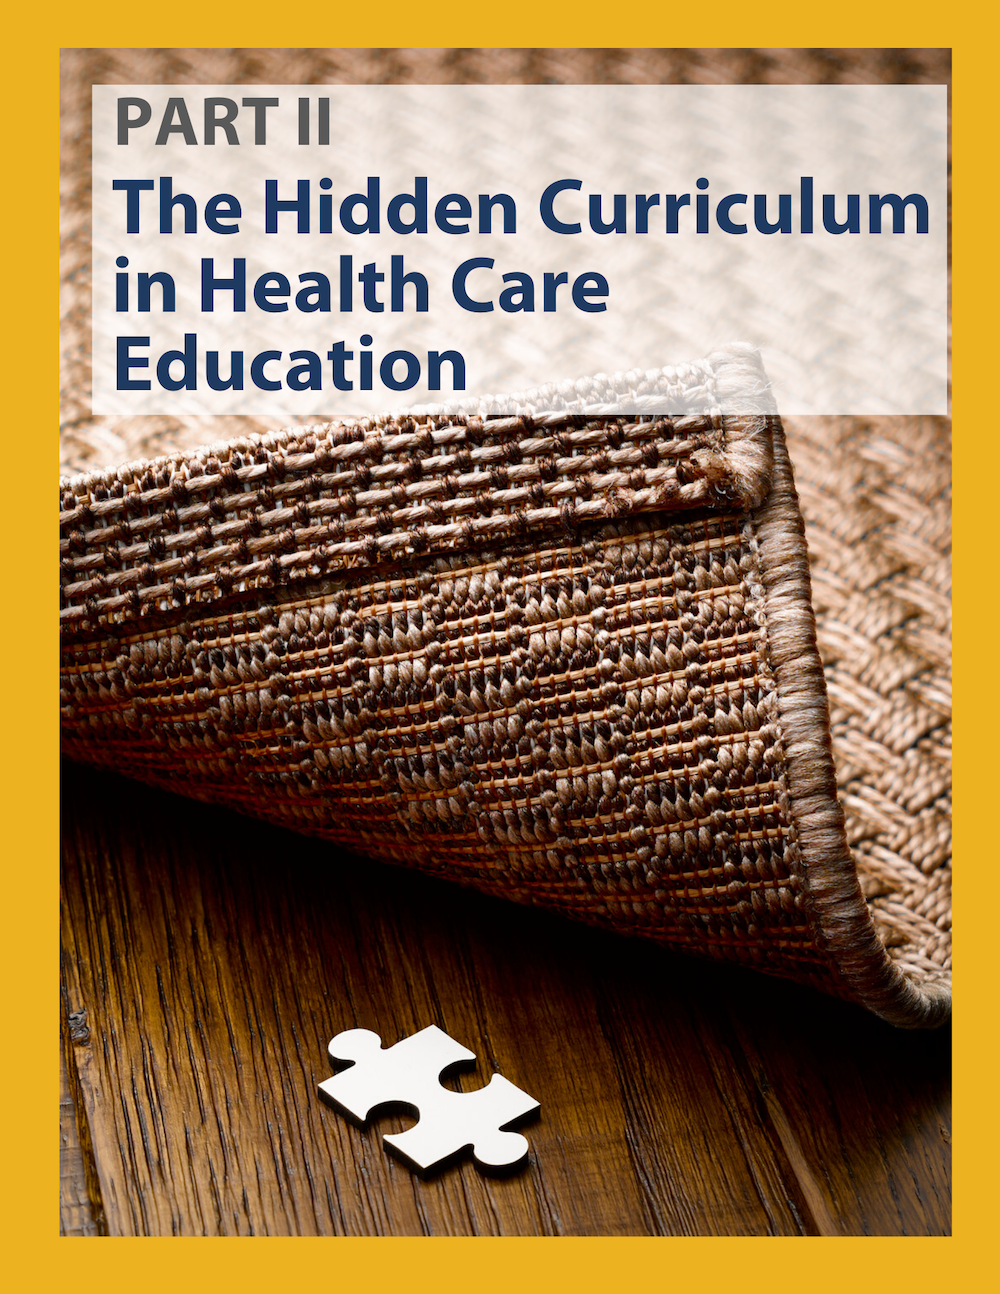 Link to a PDF  - Part 2: The Hidden Curriculum in Health Care Education